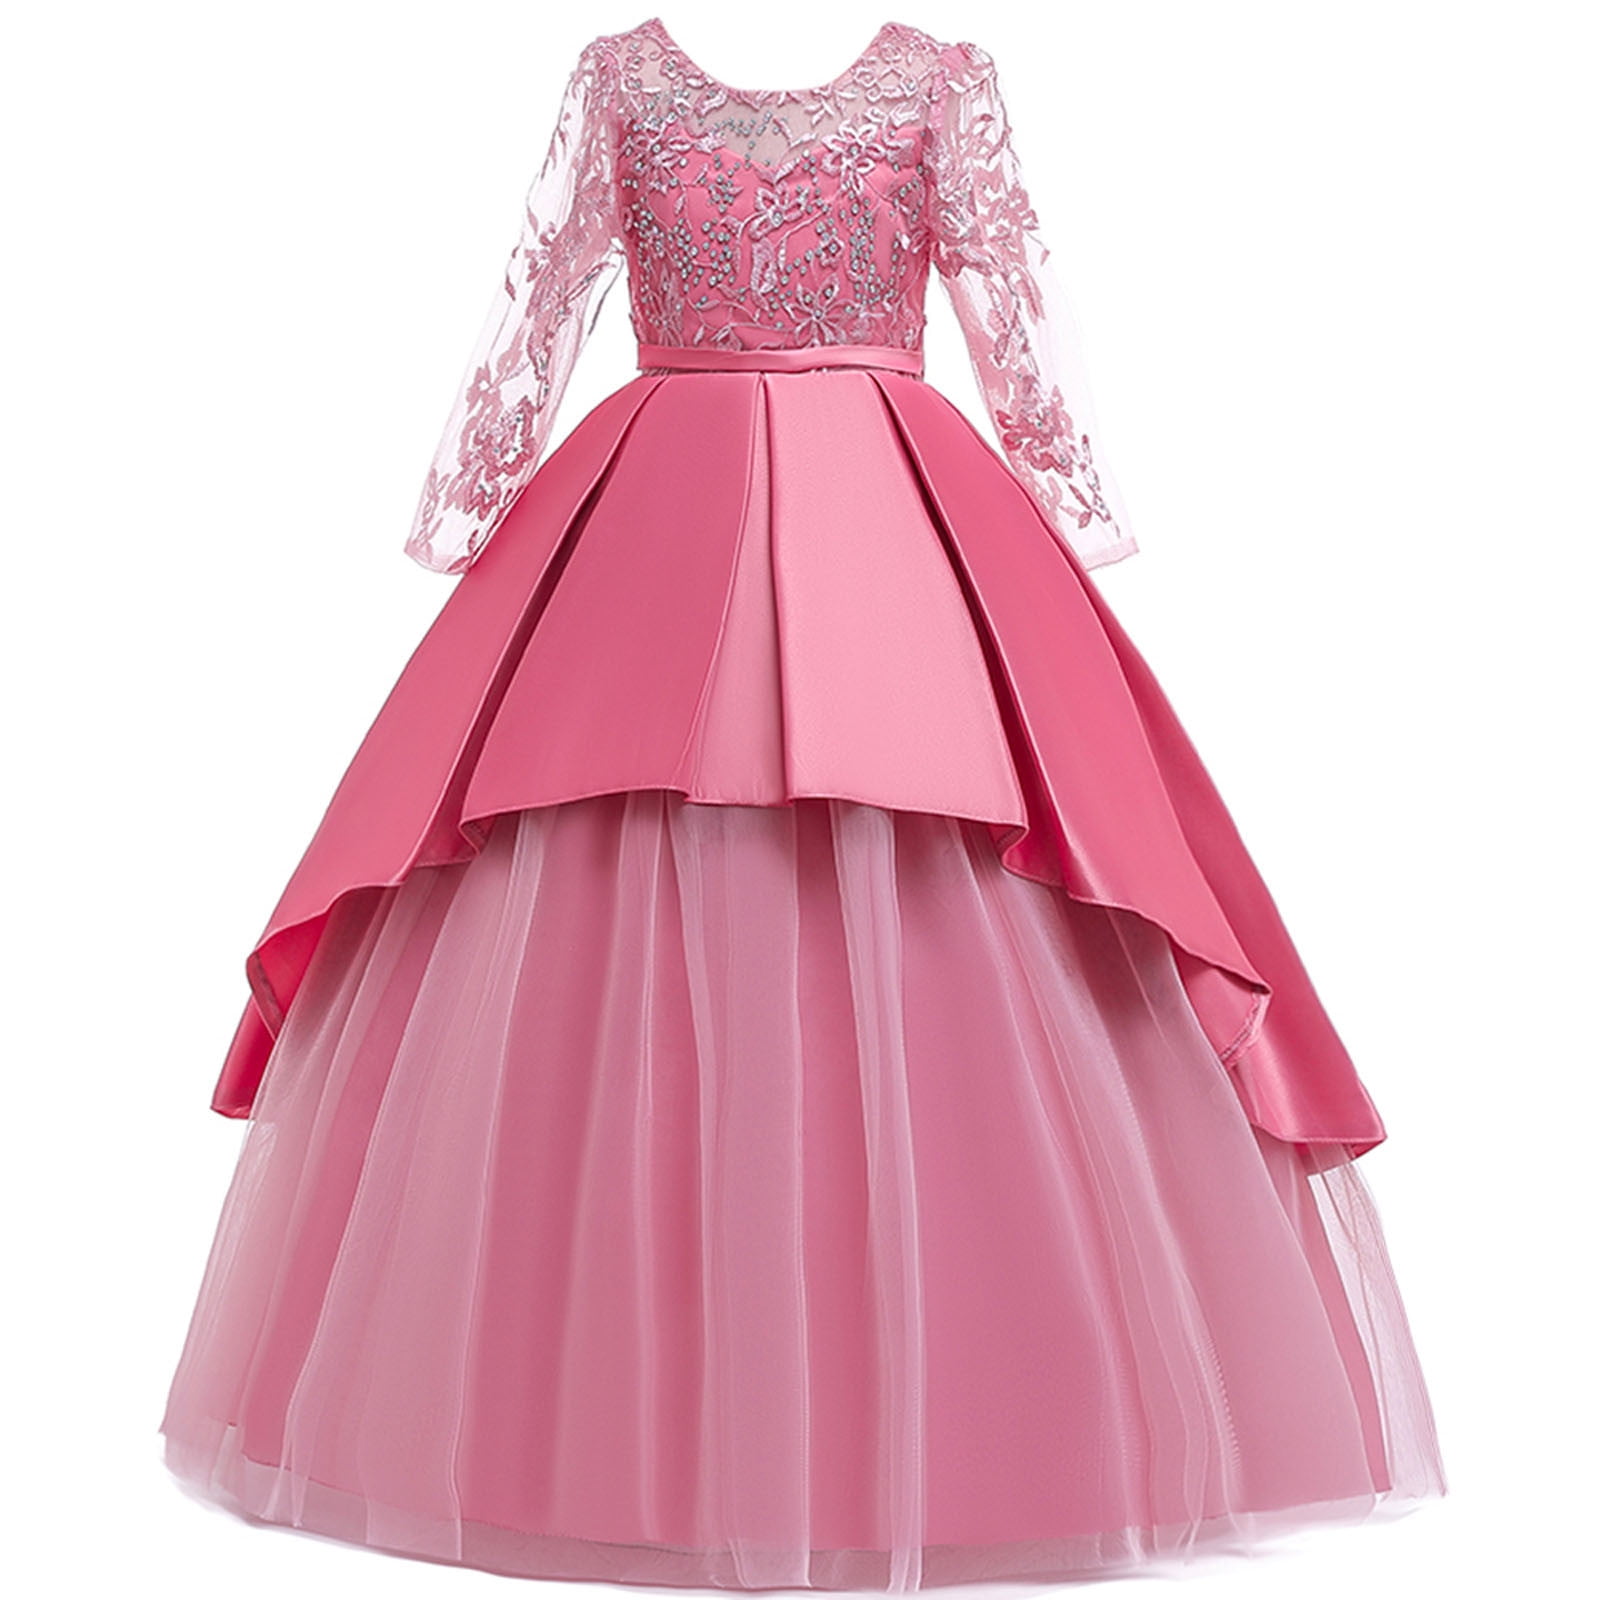 safuny Girls's Party Gown Birthday Dress Clearance Floral Solid Lace  Splicing Vintage Long Sleeve Princess Dress Lovely Comfy Fit Round Neck  Holiday Pleated Mesh Swing Hem Pink 5-14Y - Walmart.com